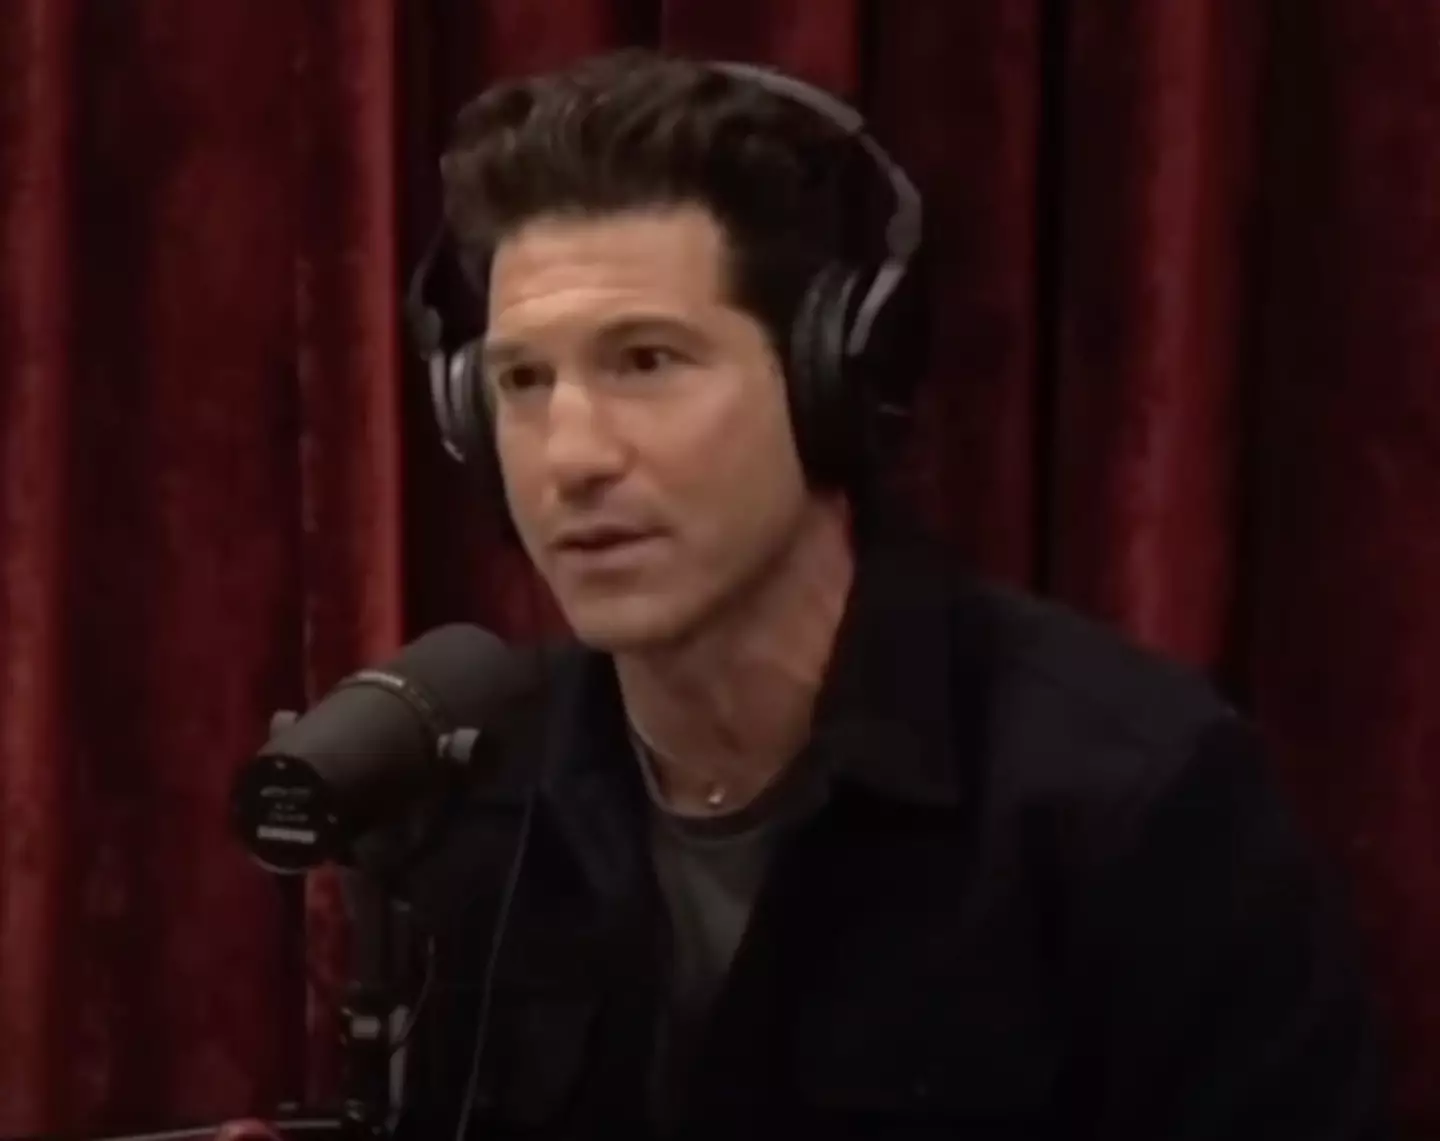 Jon Bernthal grew to respect his co-star's dedication to the role.